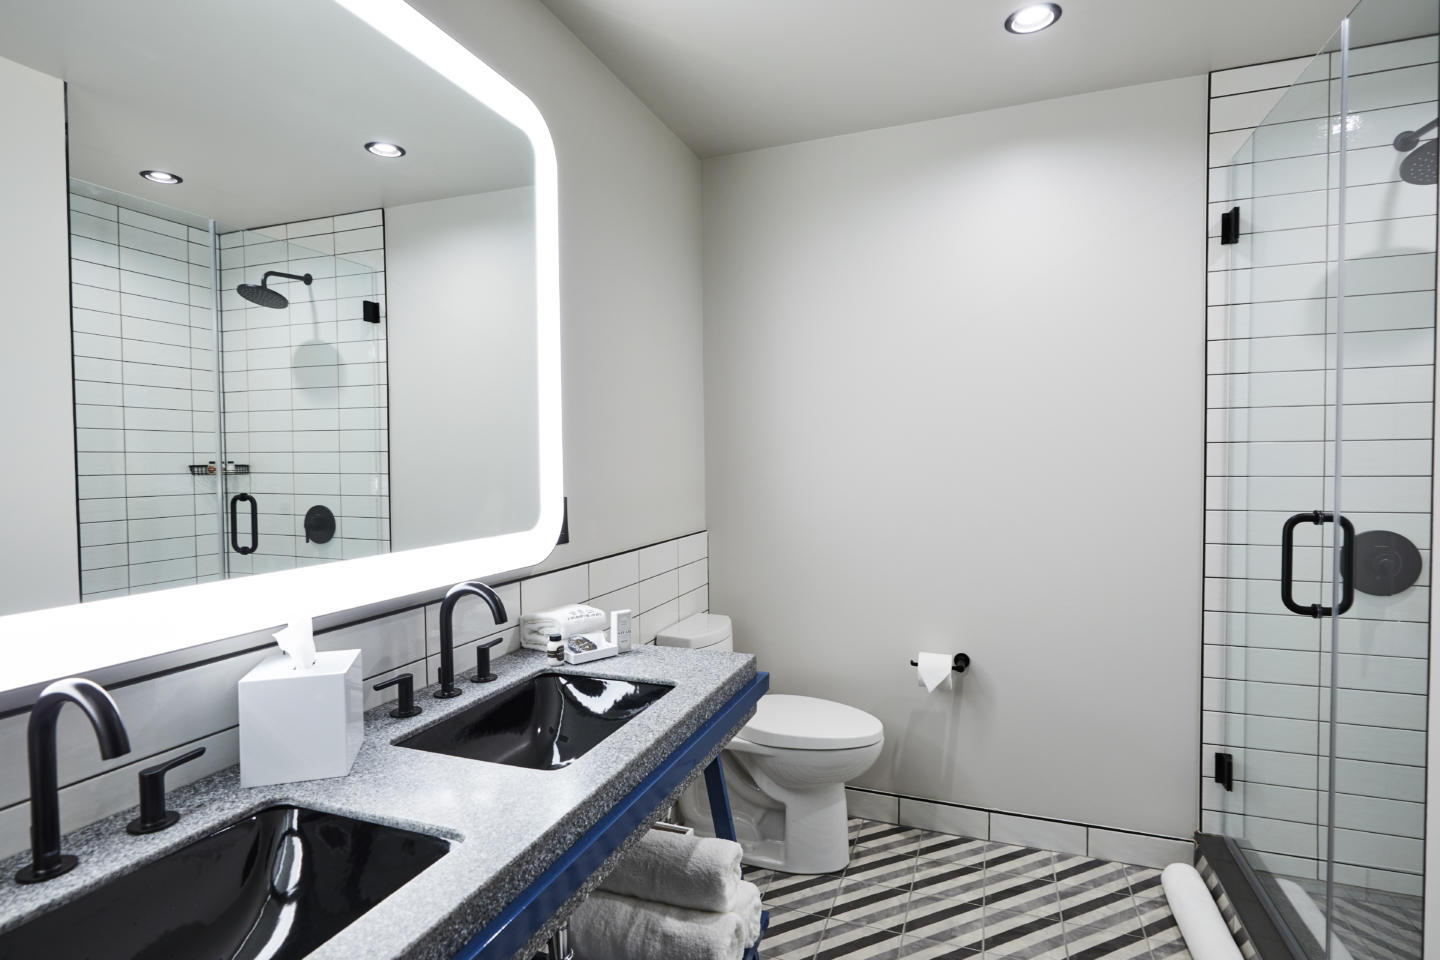 Bathroom vanity with two sinks installed at boutique hotel. 